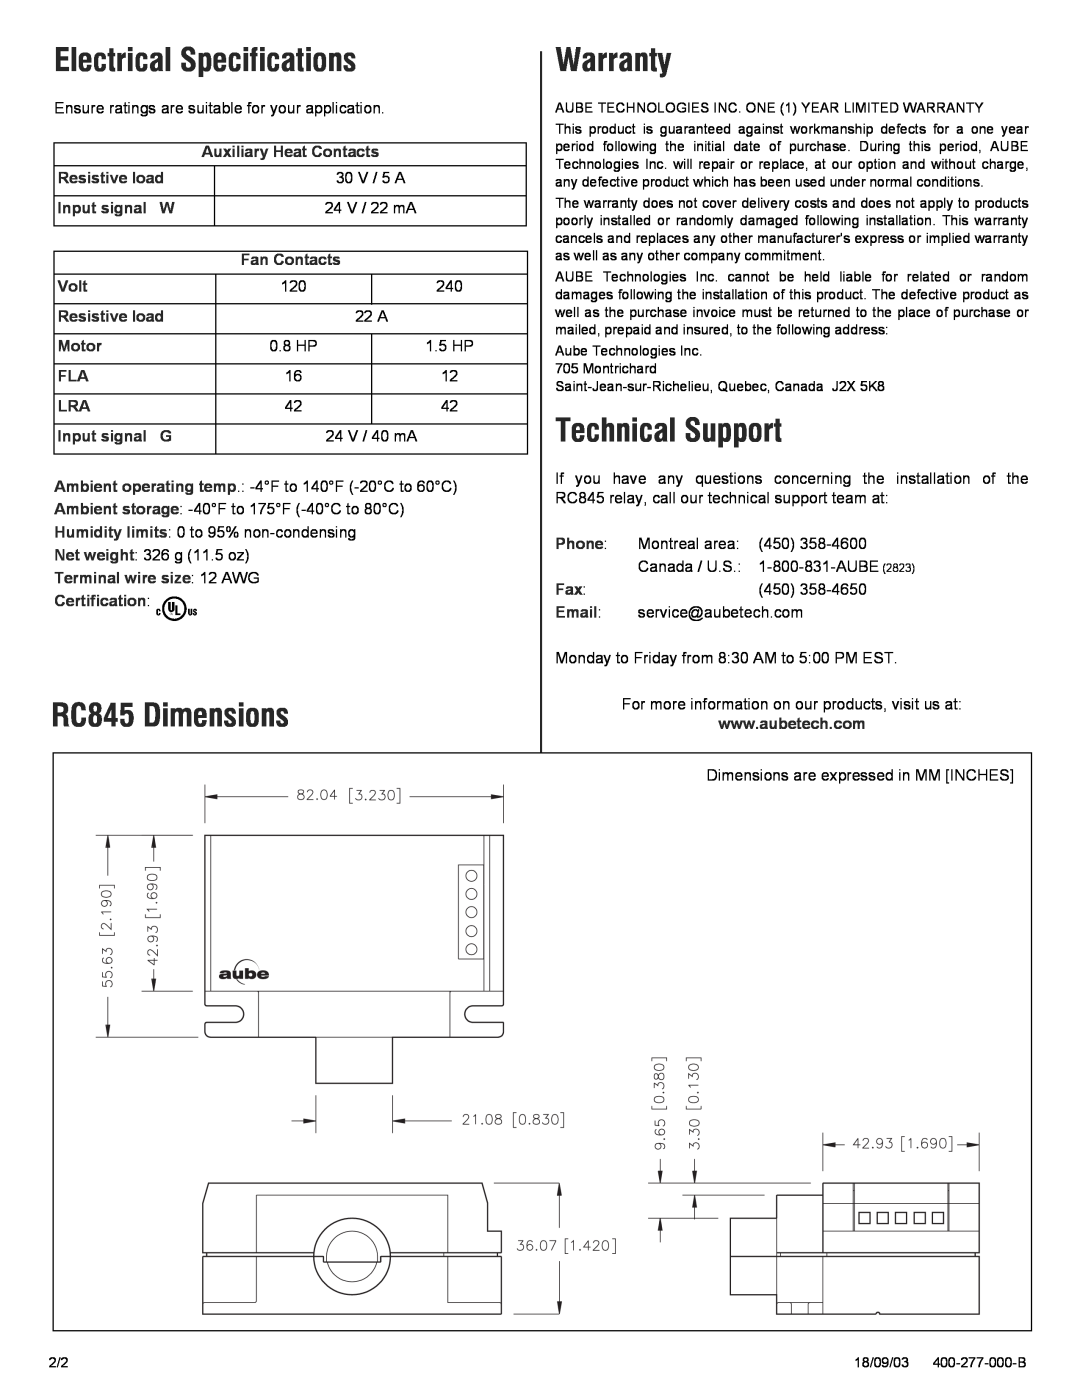 Aube Technologies installation instructions Electrical Specifications, Warranty, Technical Support, RC845 Dimensions 